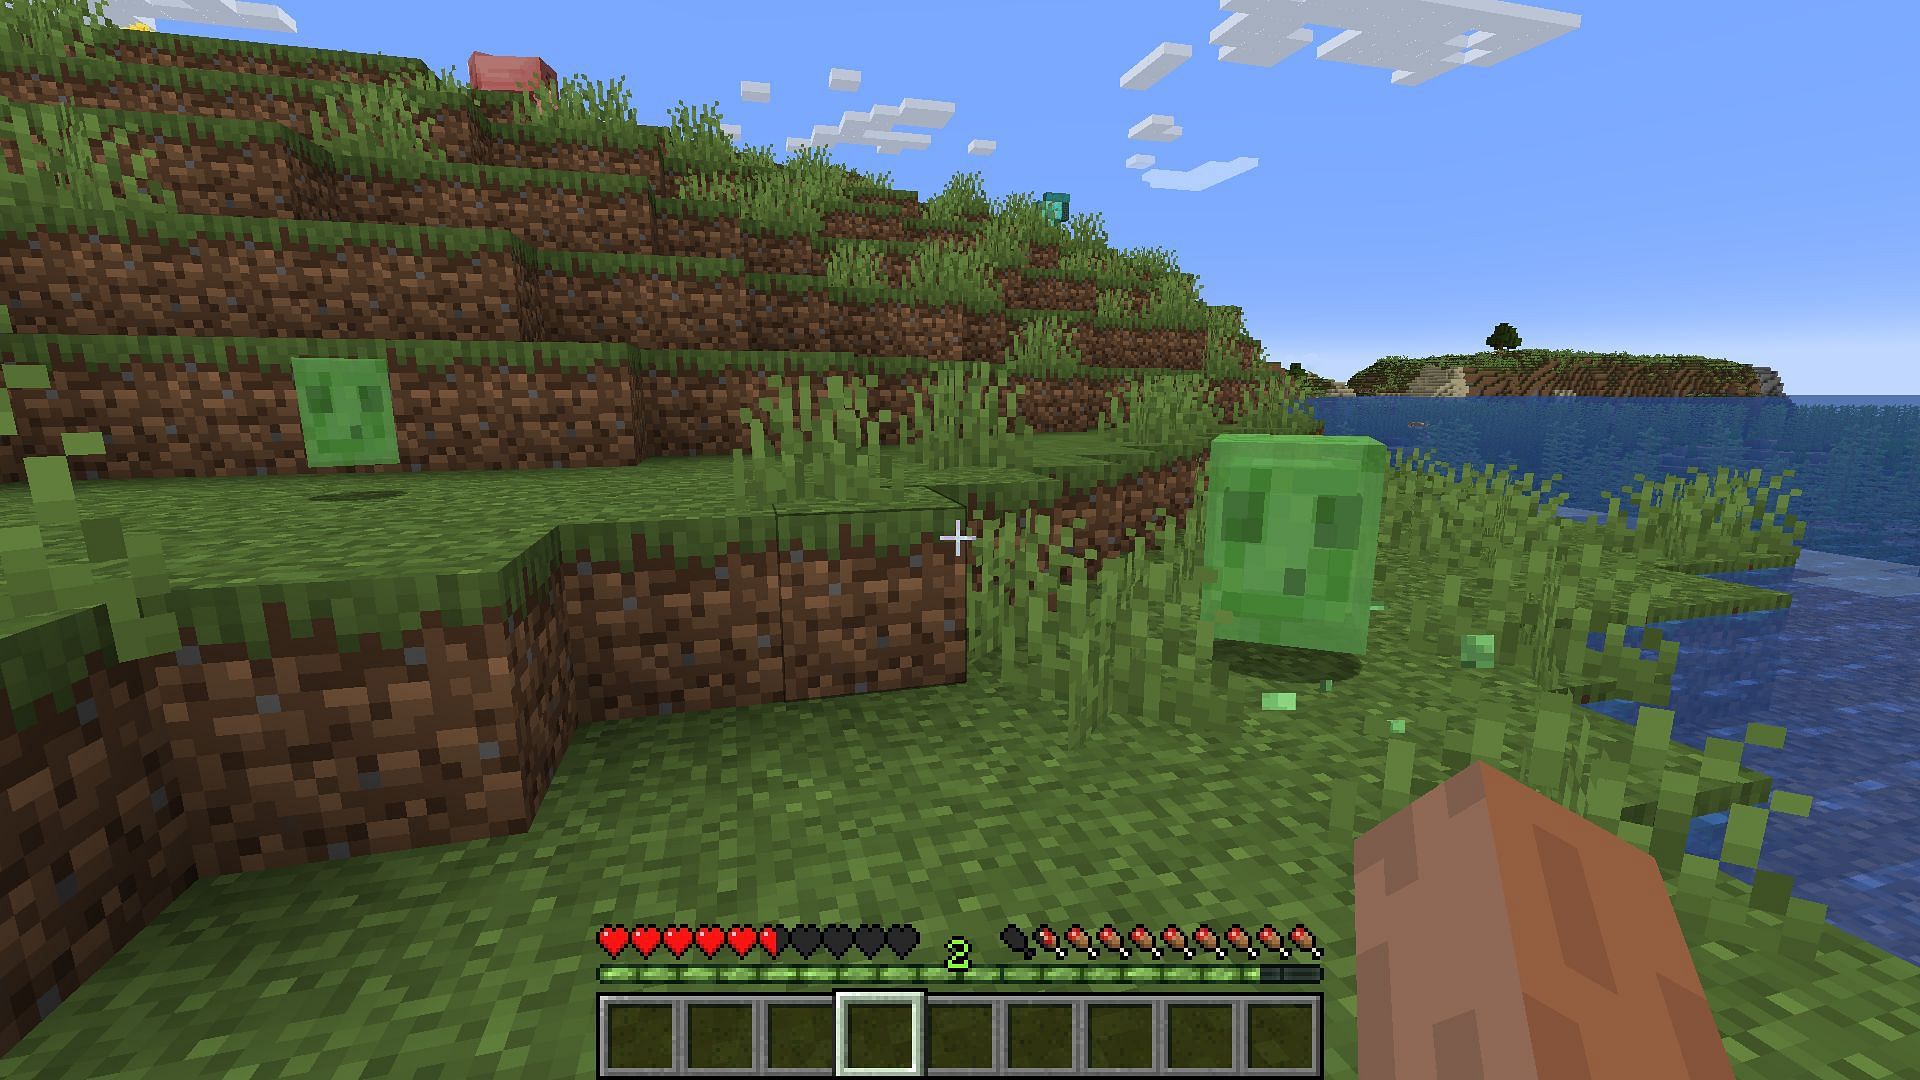 A slime homing in on a player (Image via Minecraft)